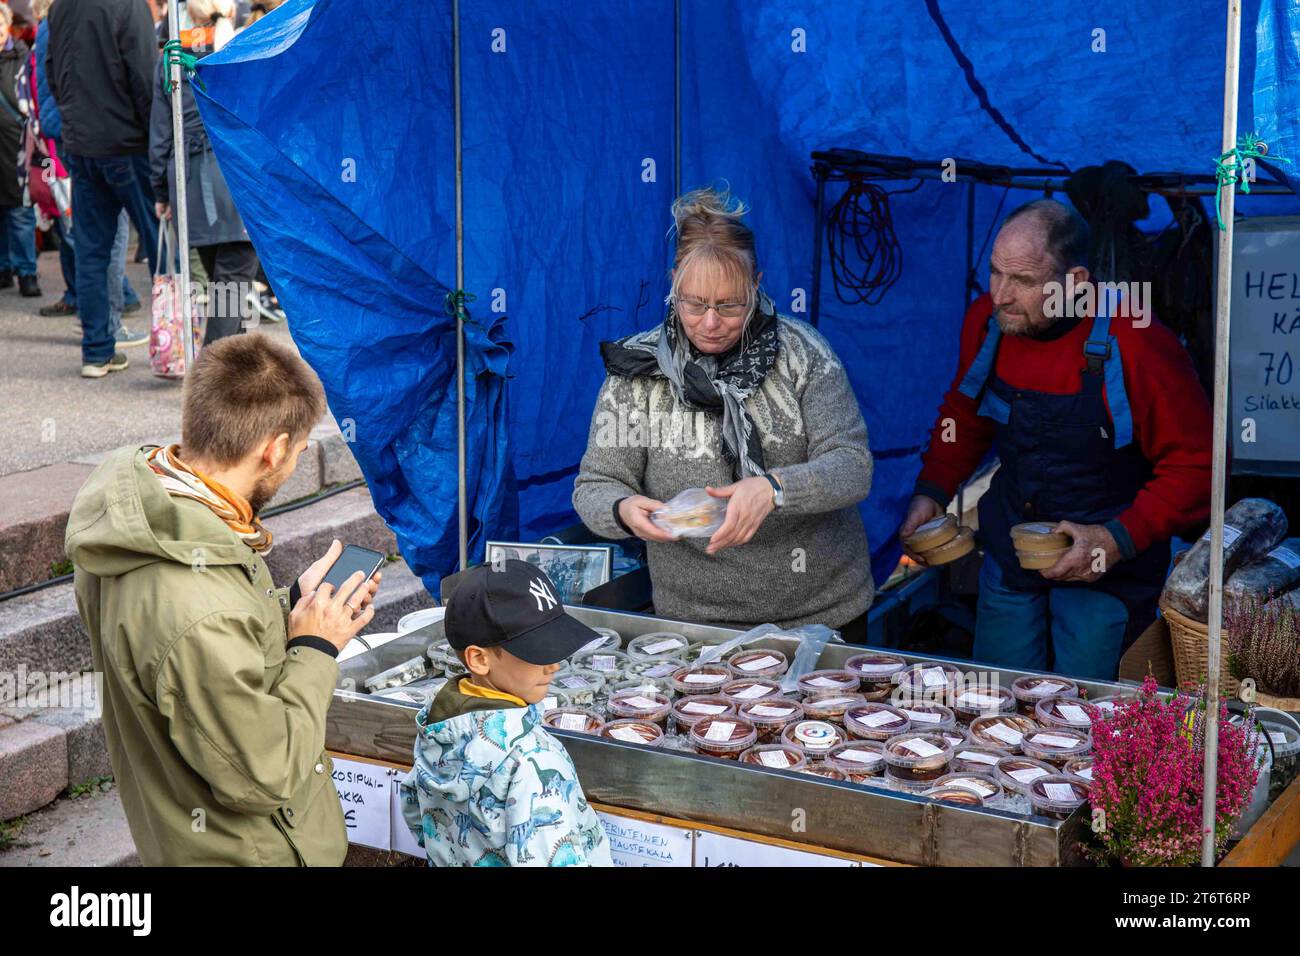 Vendors selling Baltic herring products from boat stall by Market Square at Stadin silakkamarkkinat or Baltic Herring Fair in Helsinki, Finland Stock Photo